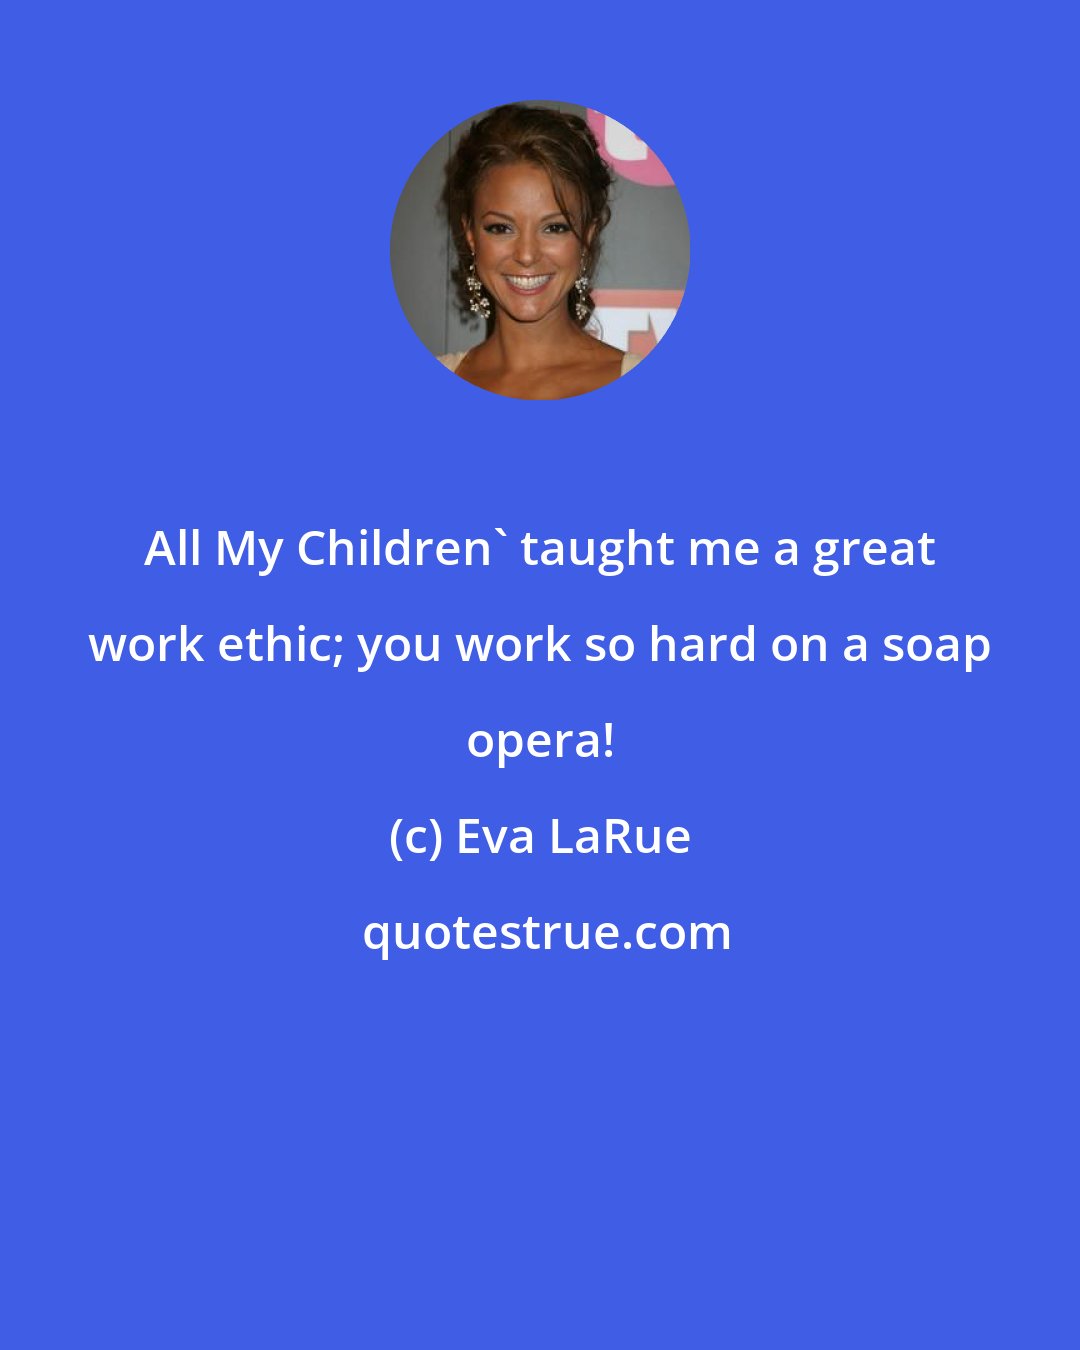 Eva LaRue: All My Children' taught me a great work ethic; you work so hard on a soap opera!